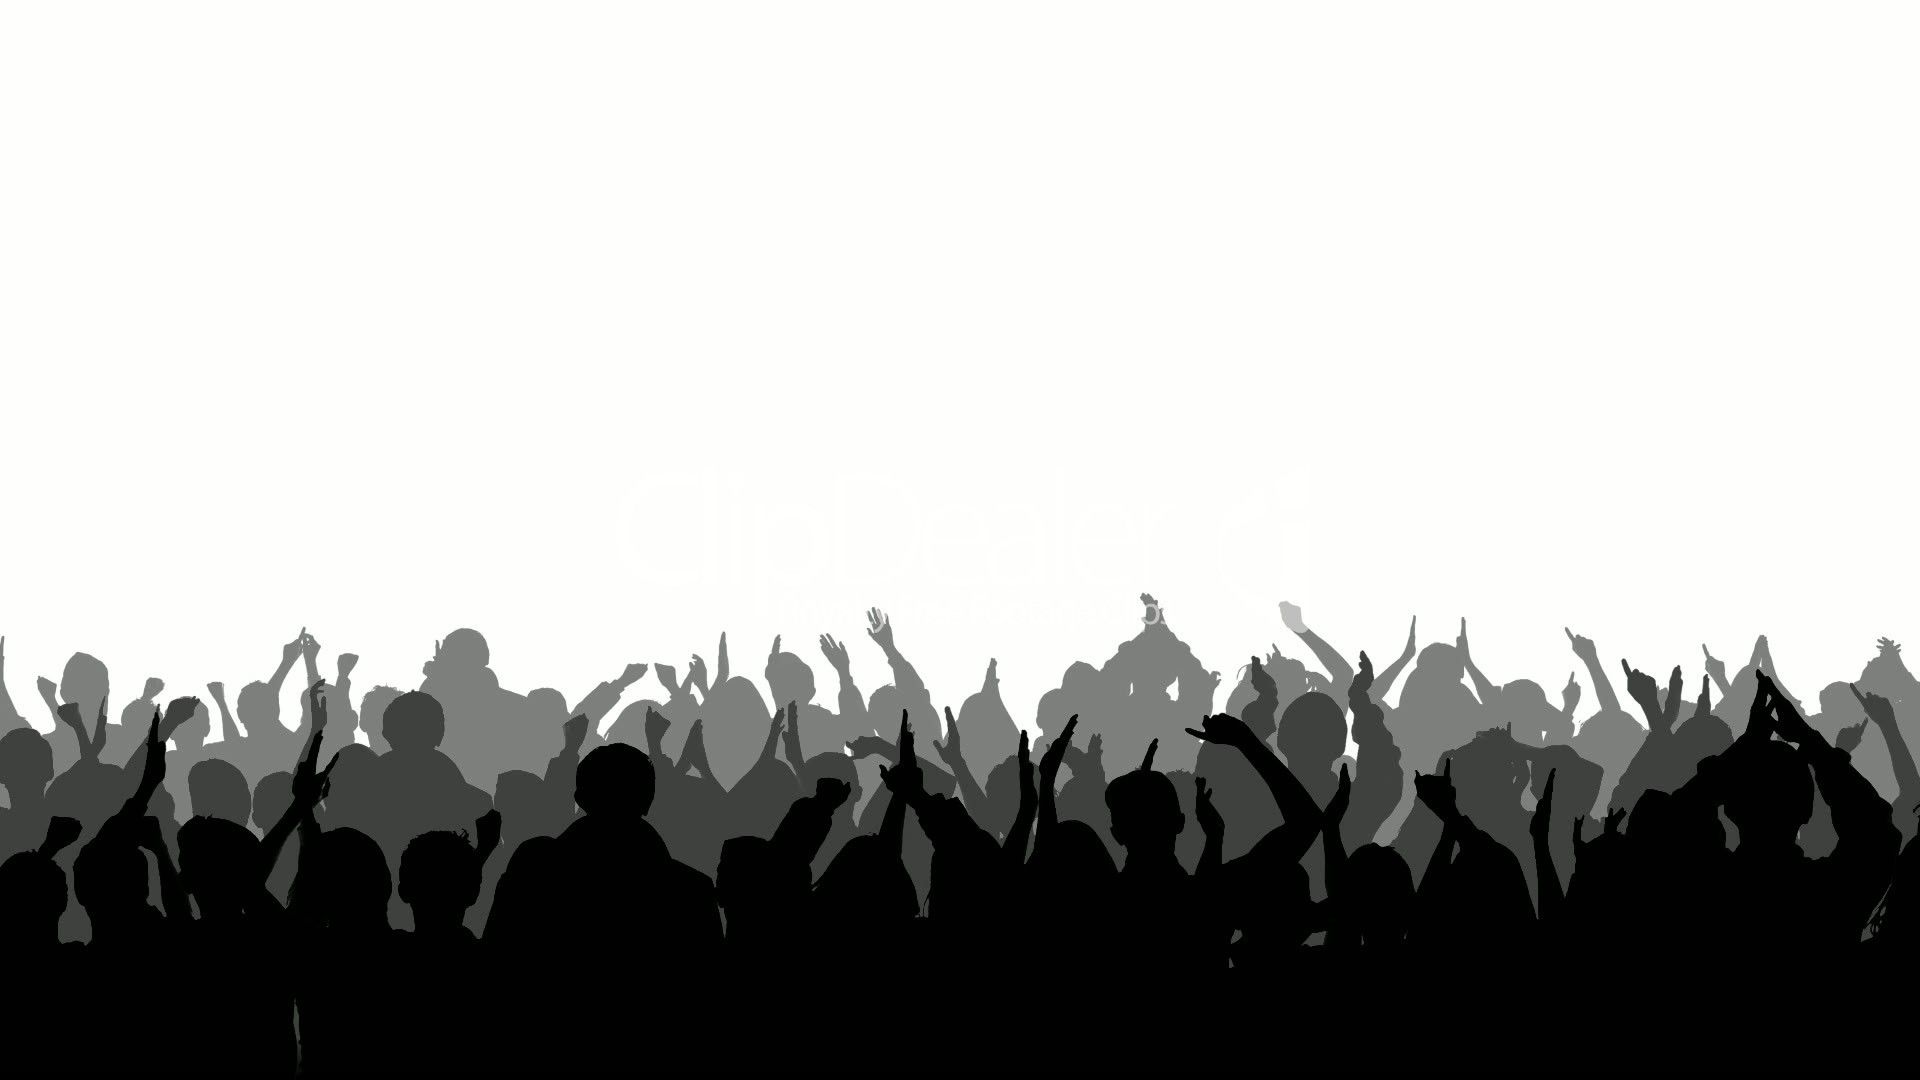 Cheering Crowd Silhouettes 2: Royalty Free Video And Stock Footage. Banner Background Image, Royalty Free Video, Silhouette